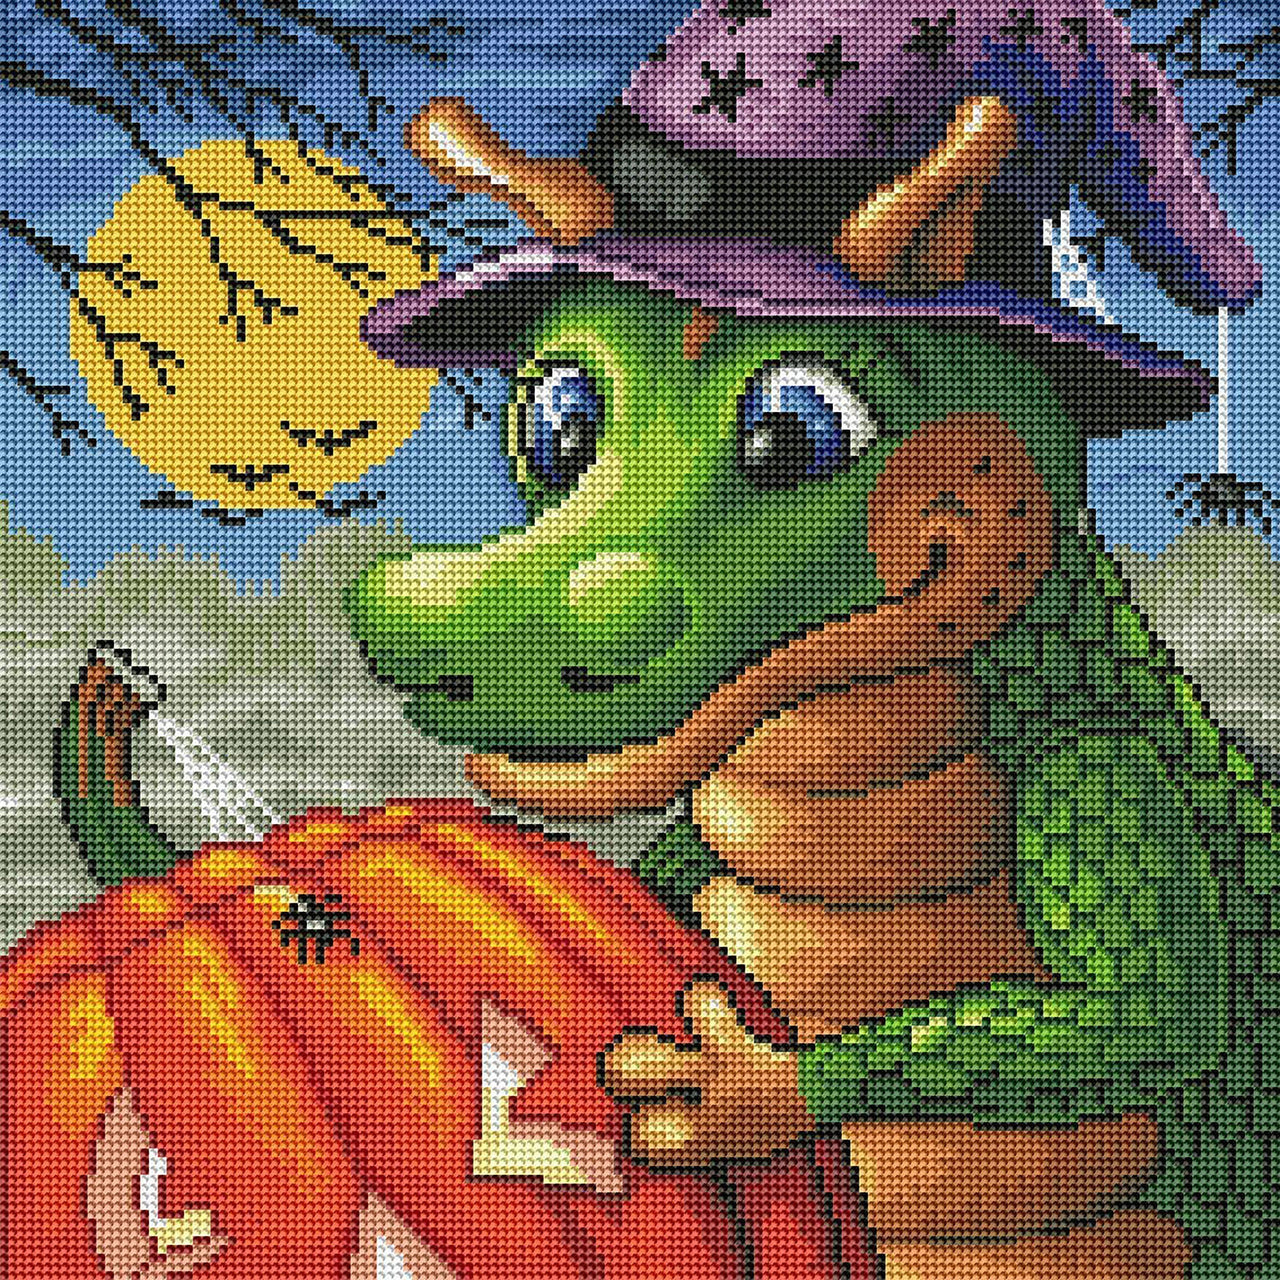 Diamond Painting Jack O'Lantern Time 16" x 16″ (41cm x 41cm) / Round with 42 Colors including 3 ABs and 2 Glow-in-the-Dark / 21,136